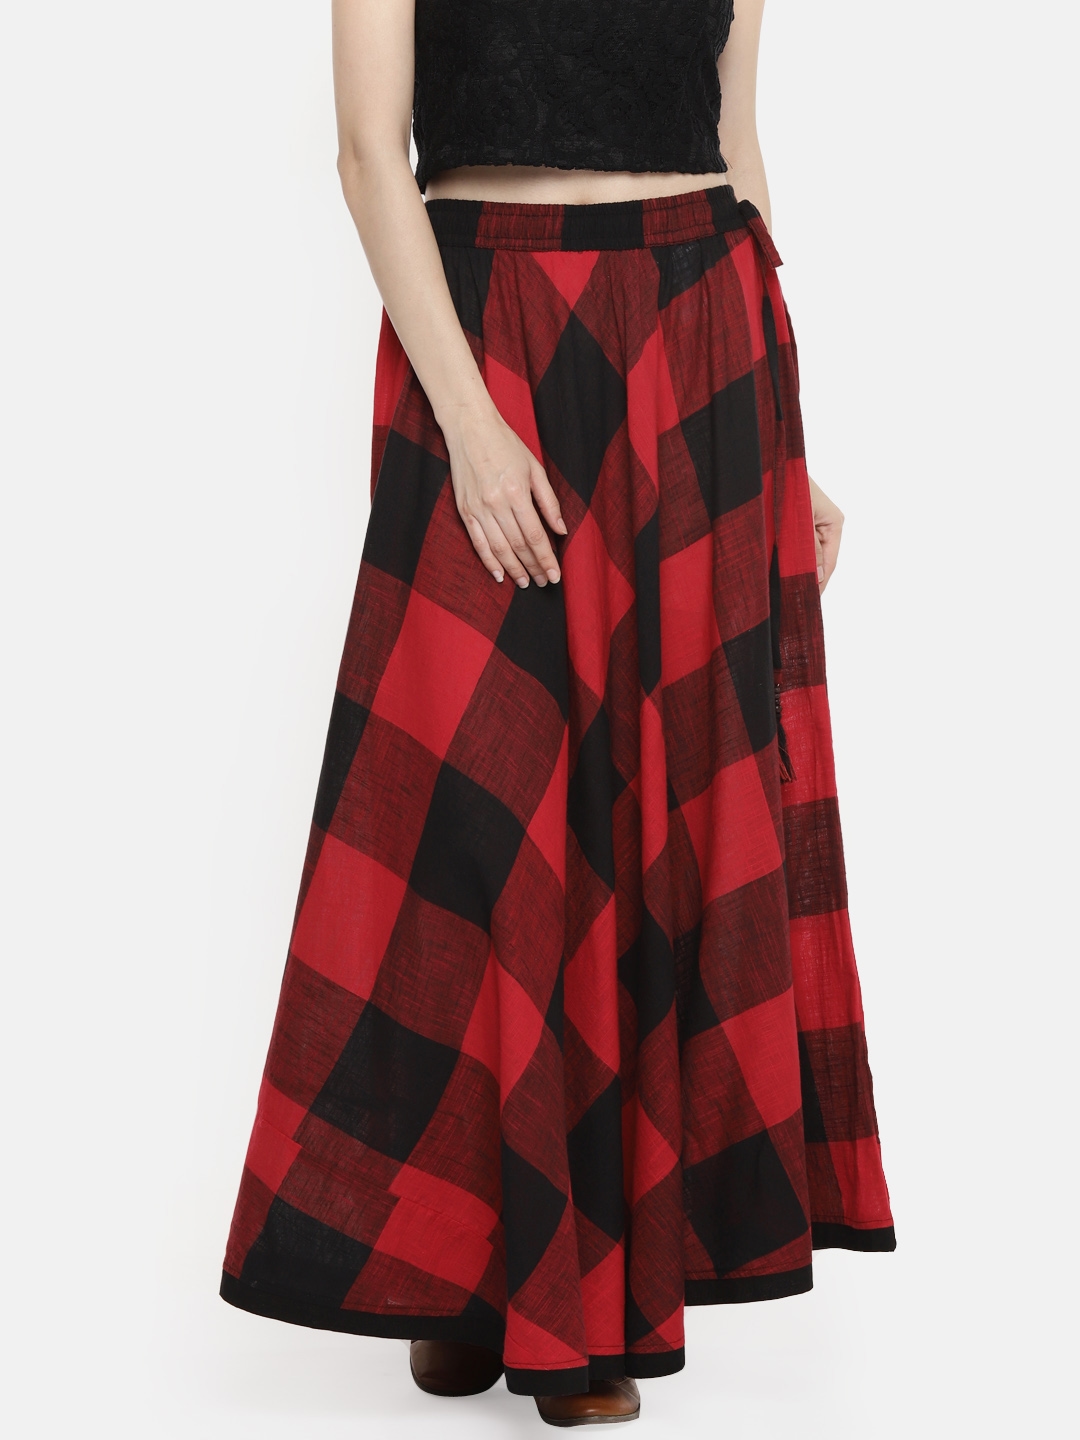 Red Check Skirts  Buy Red Check Skirts online in India